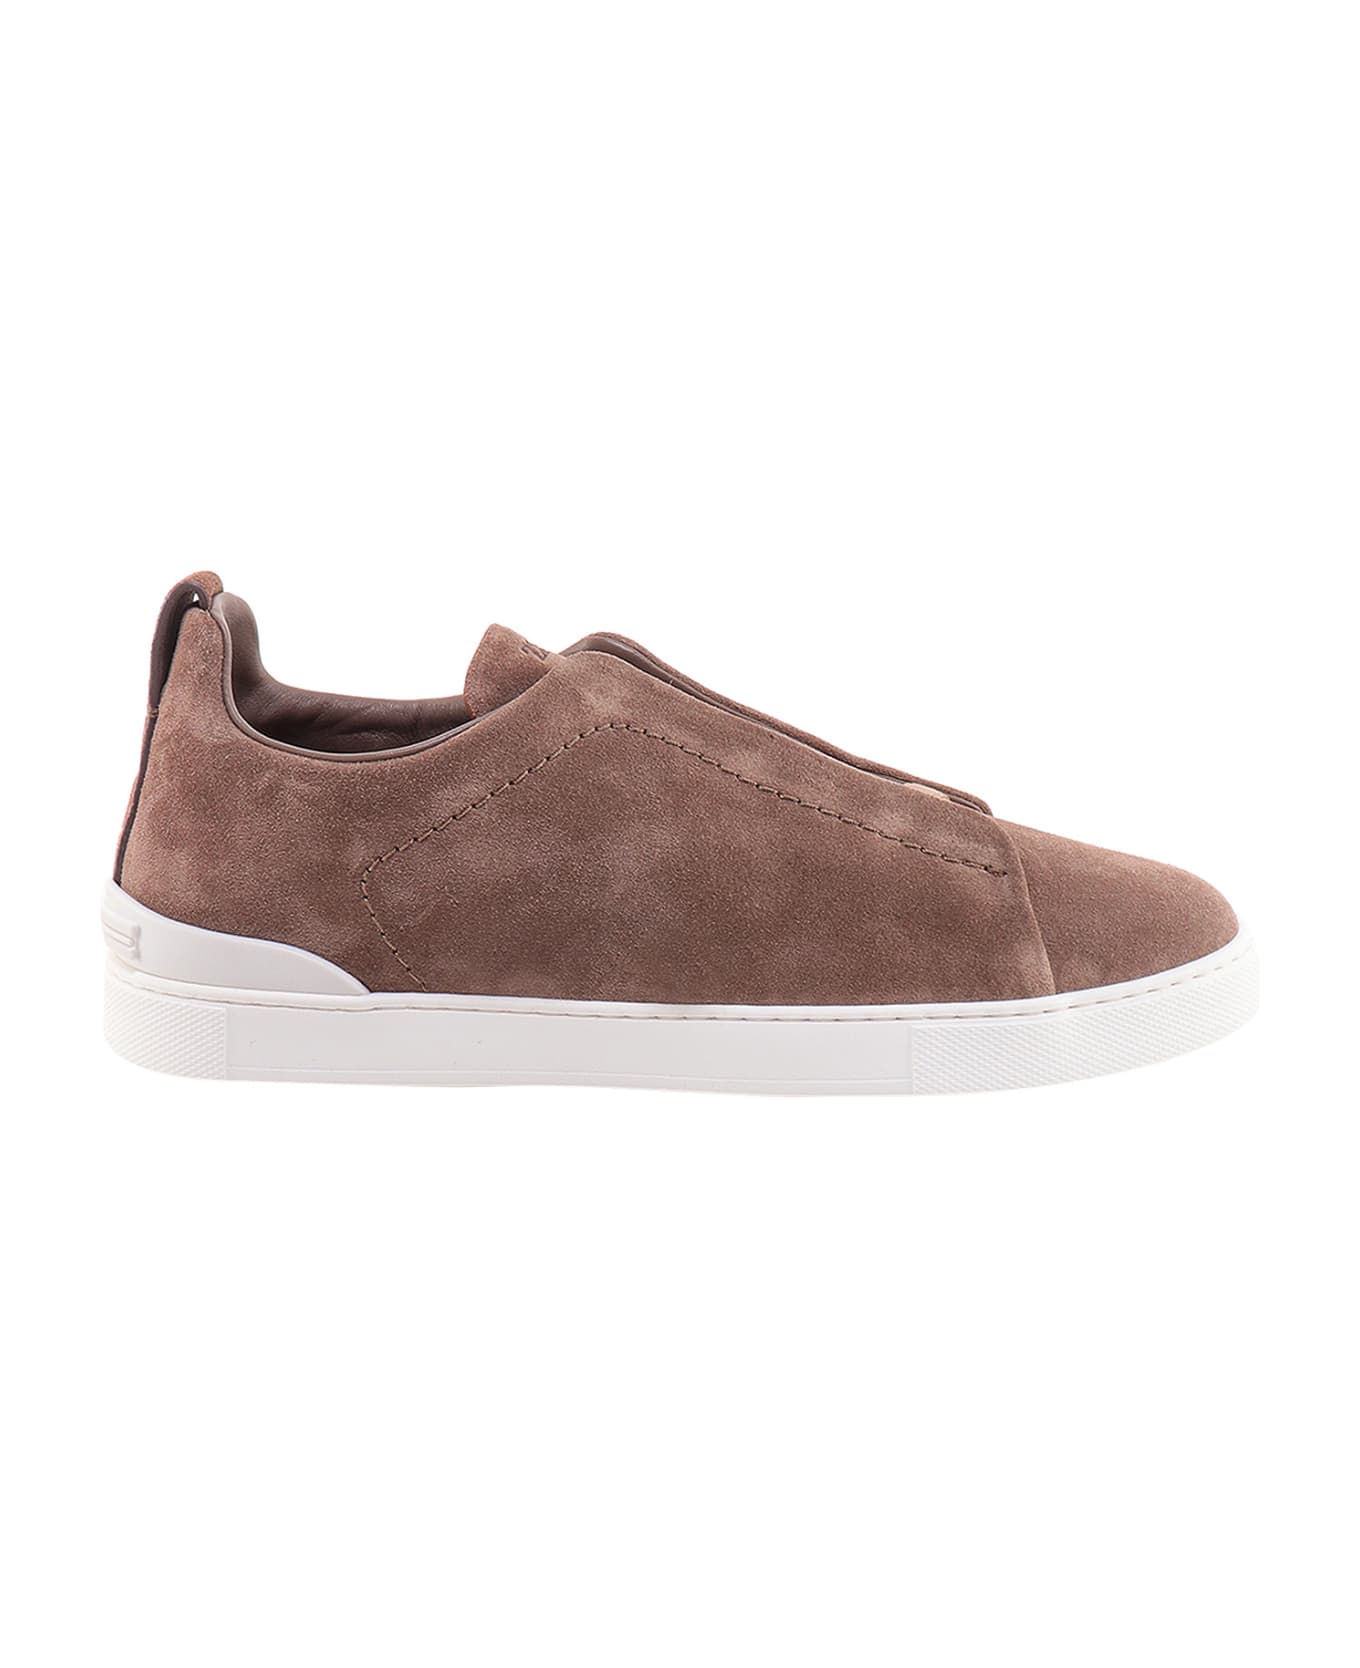 Zegna Triple Stitch Sneakers - Brown スニーカー